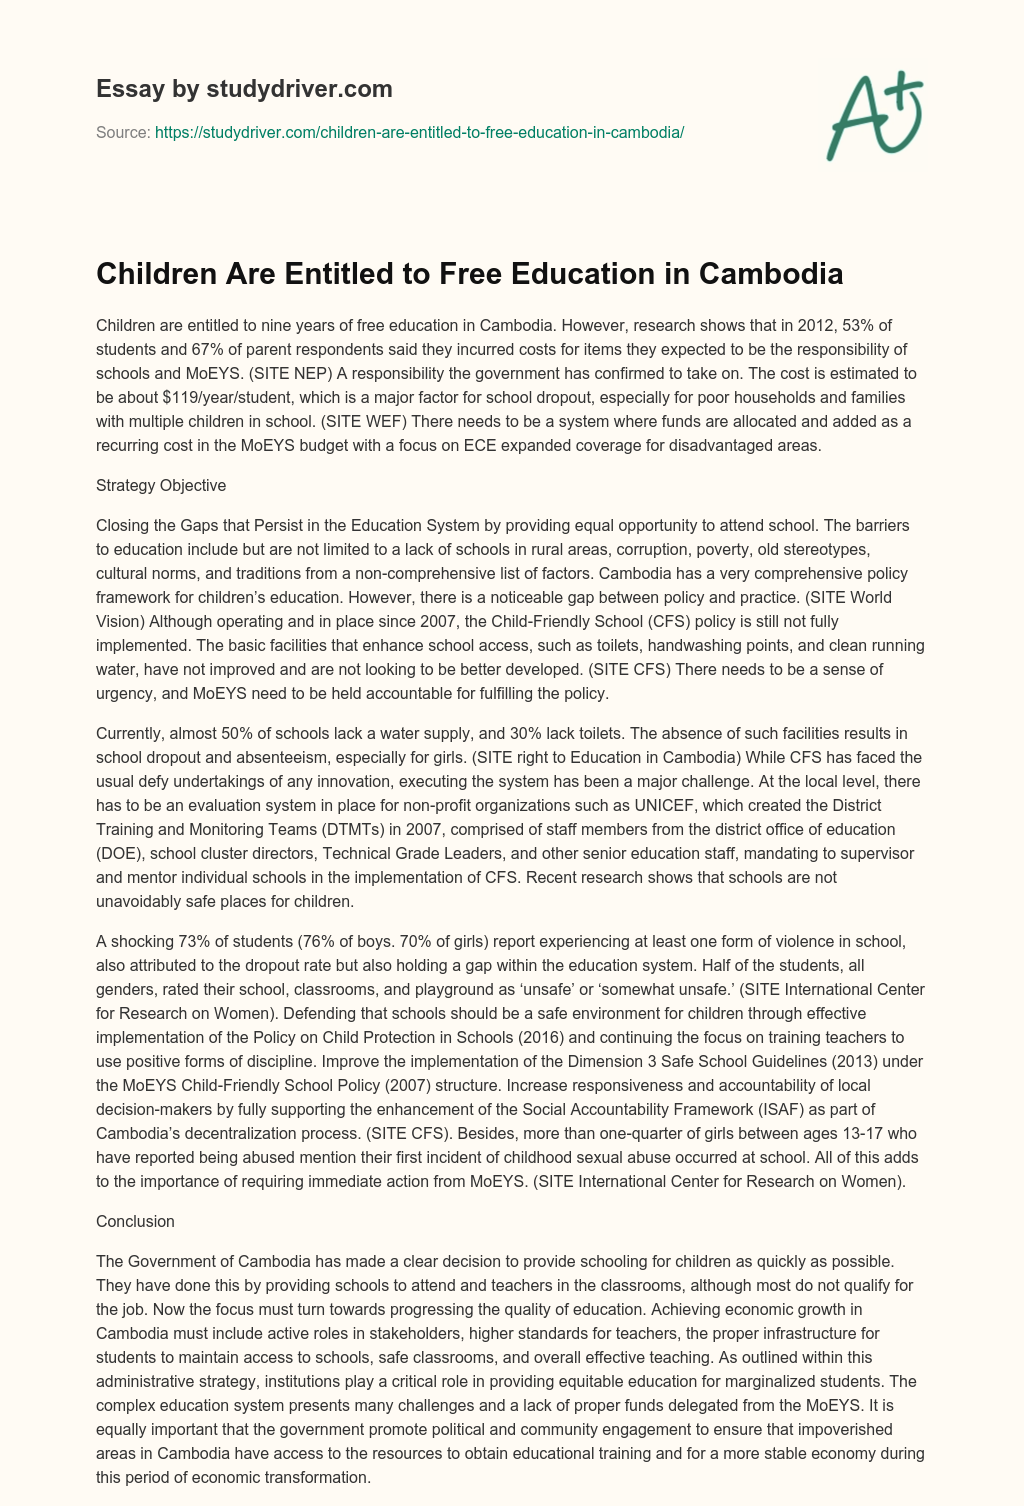 Children are Entitled to Free Education in Cambodia essay